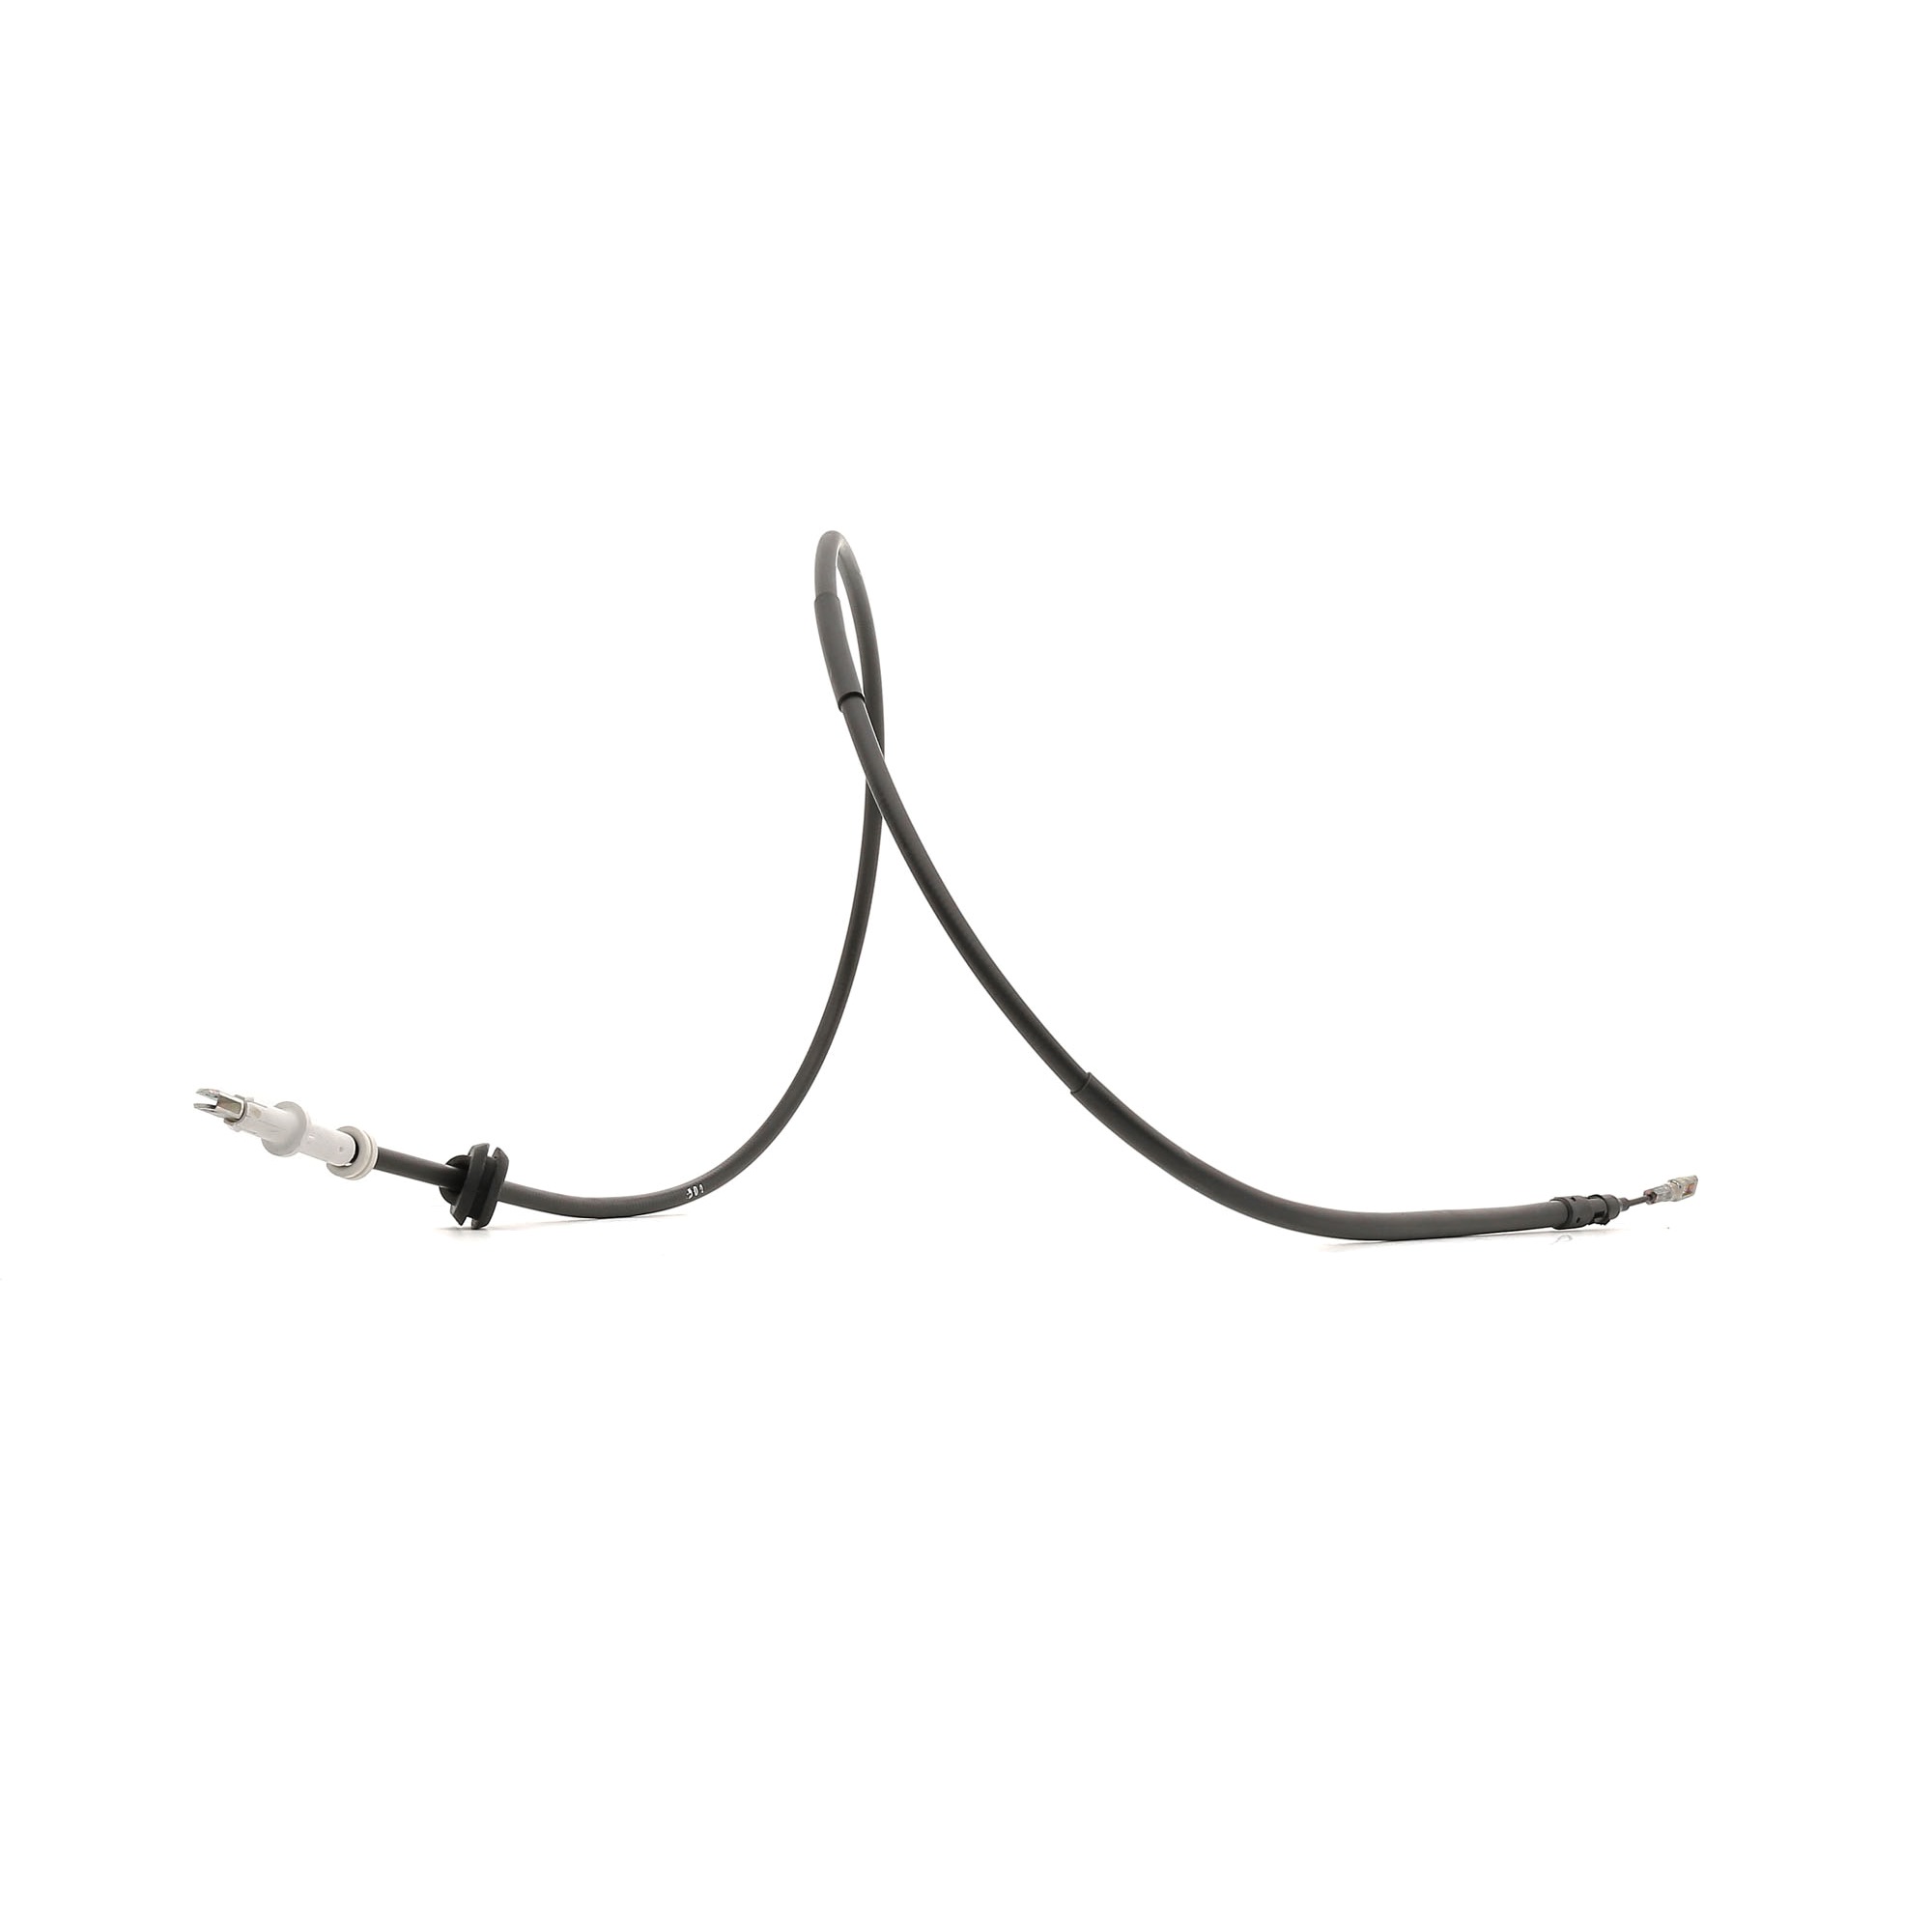 BC678 BOSCH 1987477897 Parking brake cable W211 E 320 CDI 4-matic 224 hp Diesel 2008 price